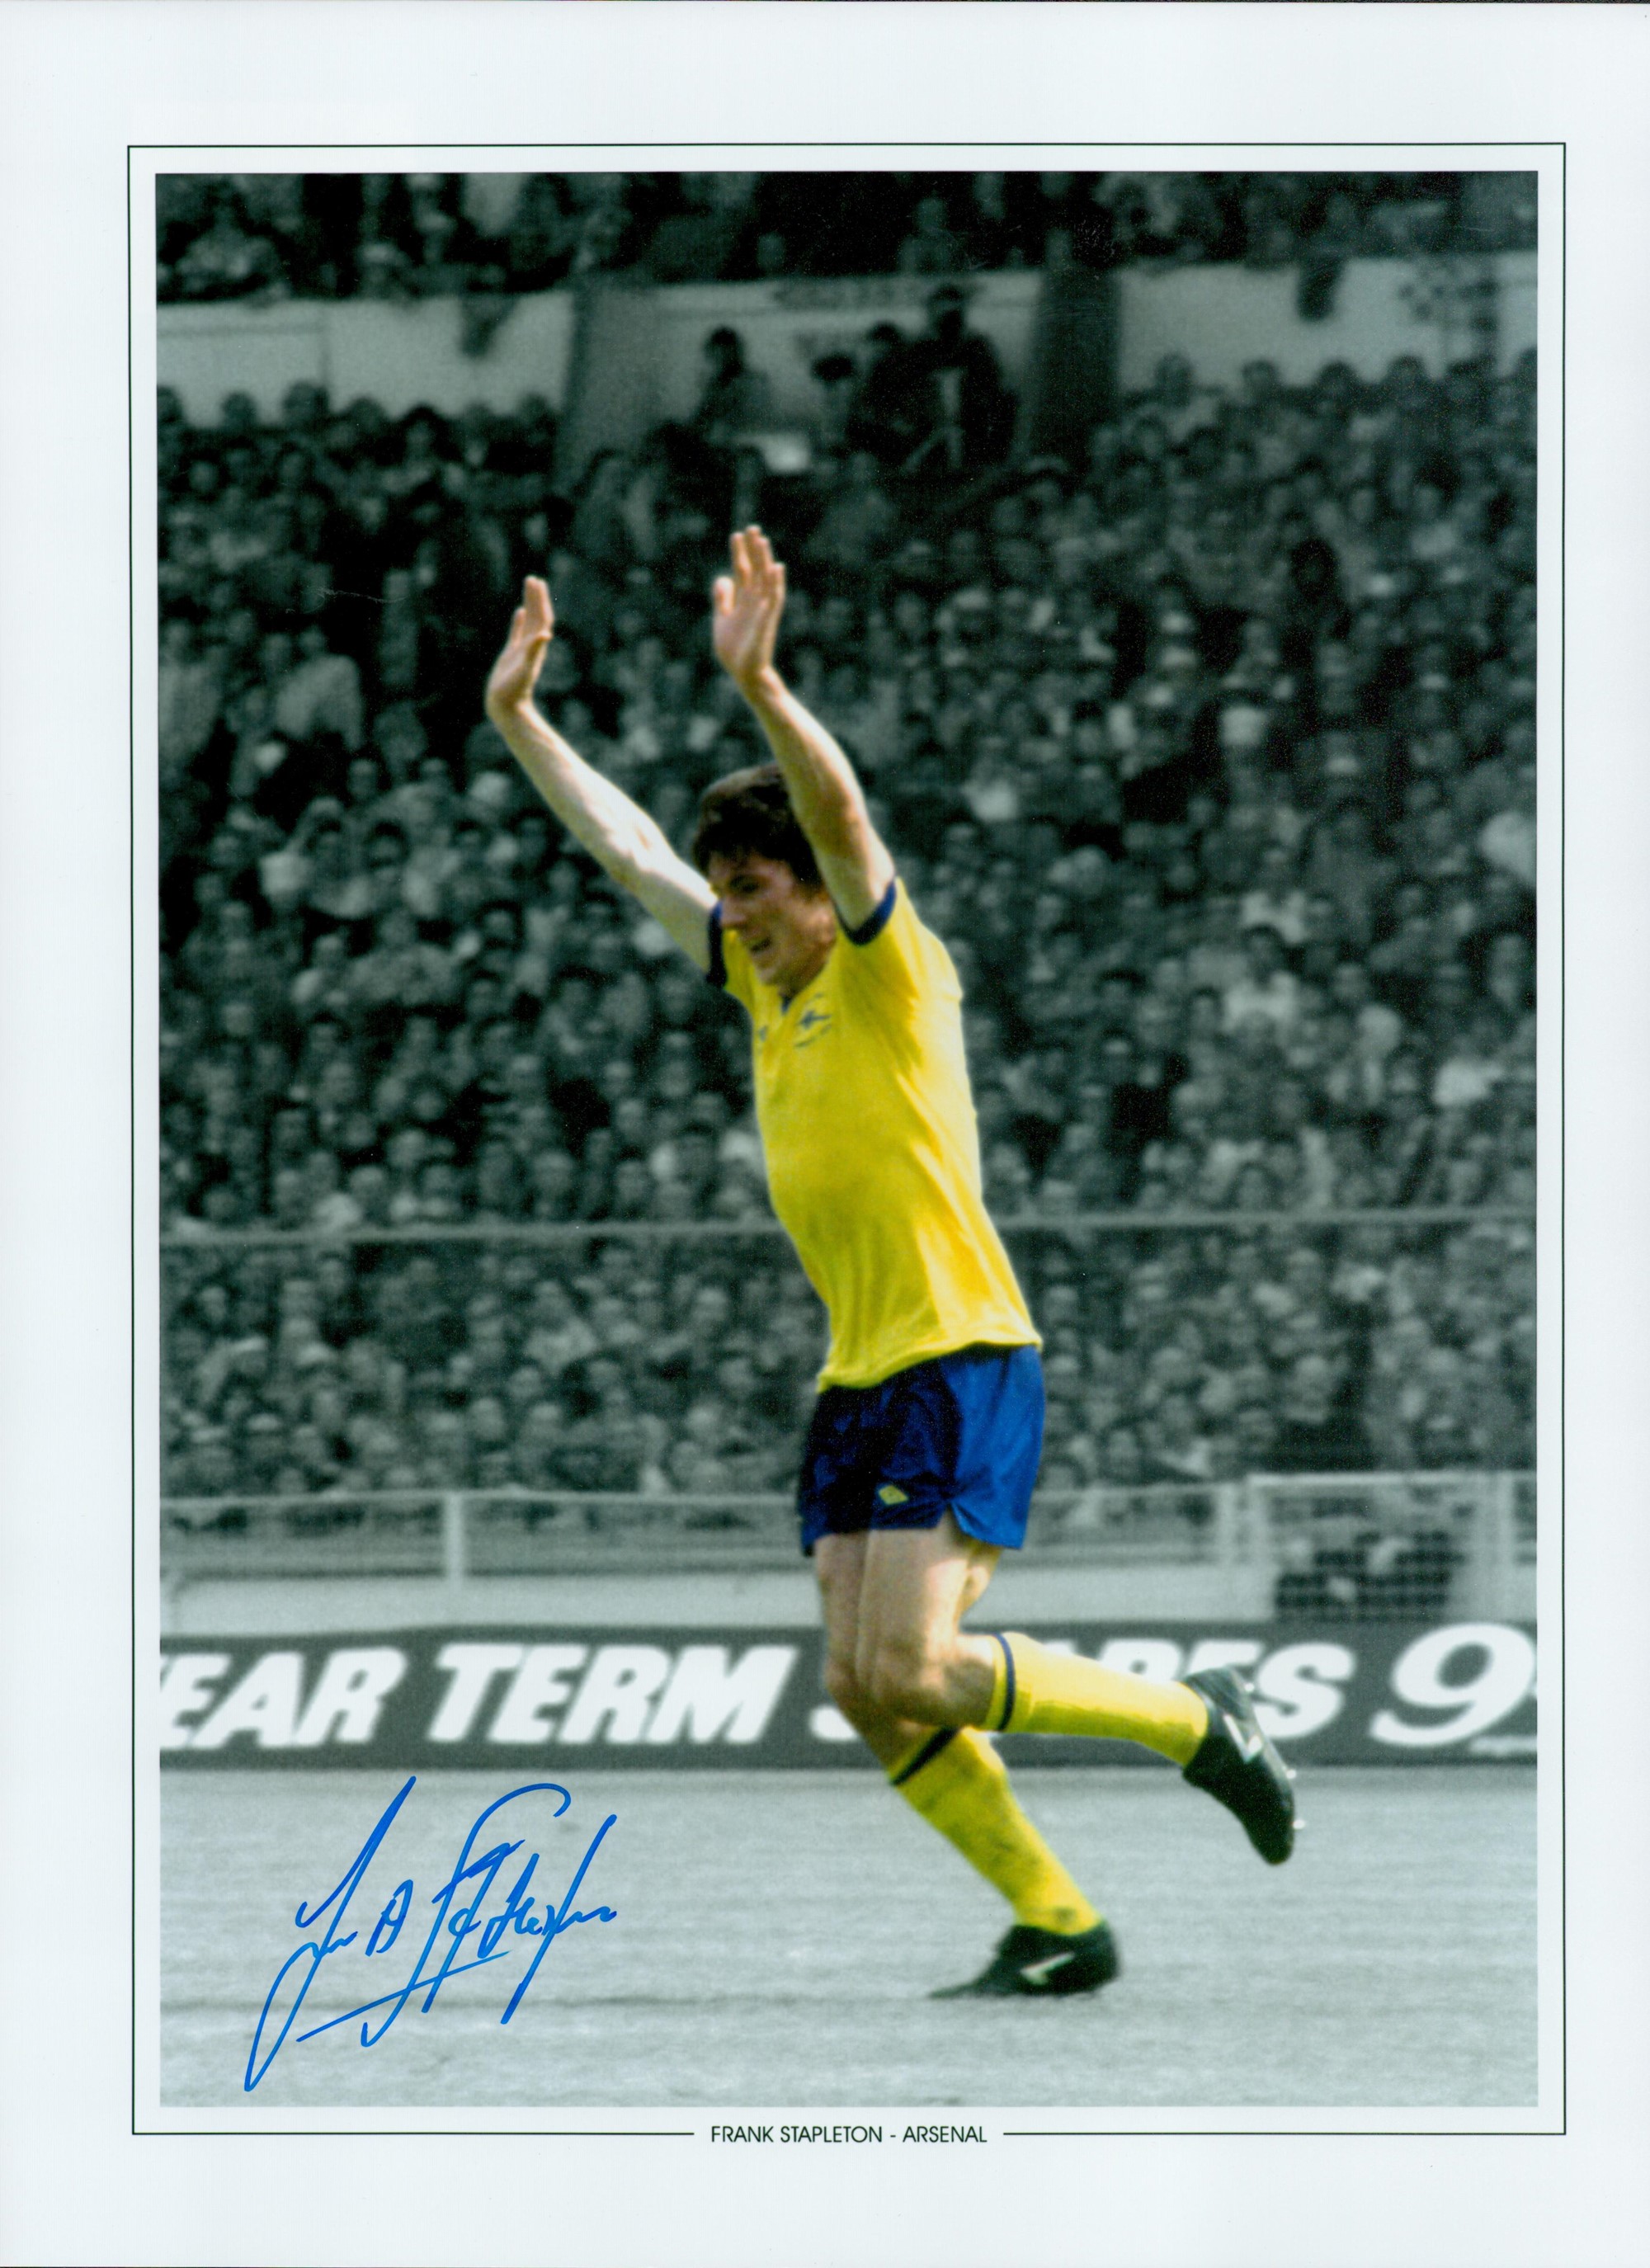 Football Frank Stapleton signed Arsenal 16x12 colourised print. Good condition. All autographs